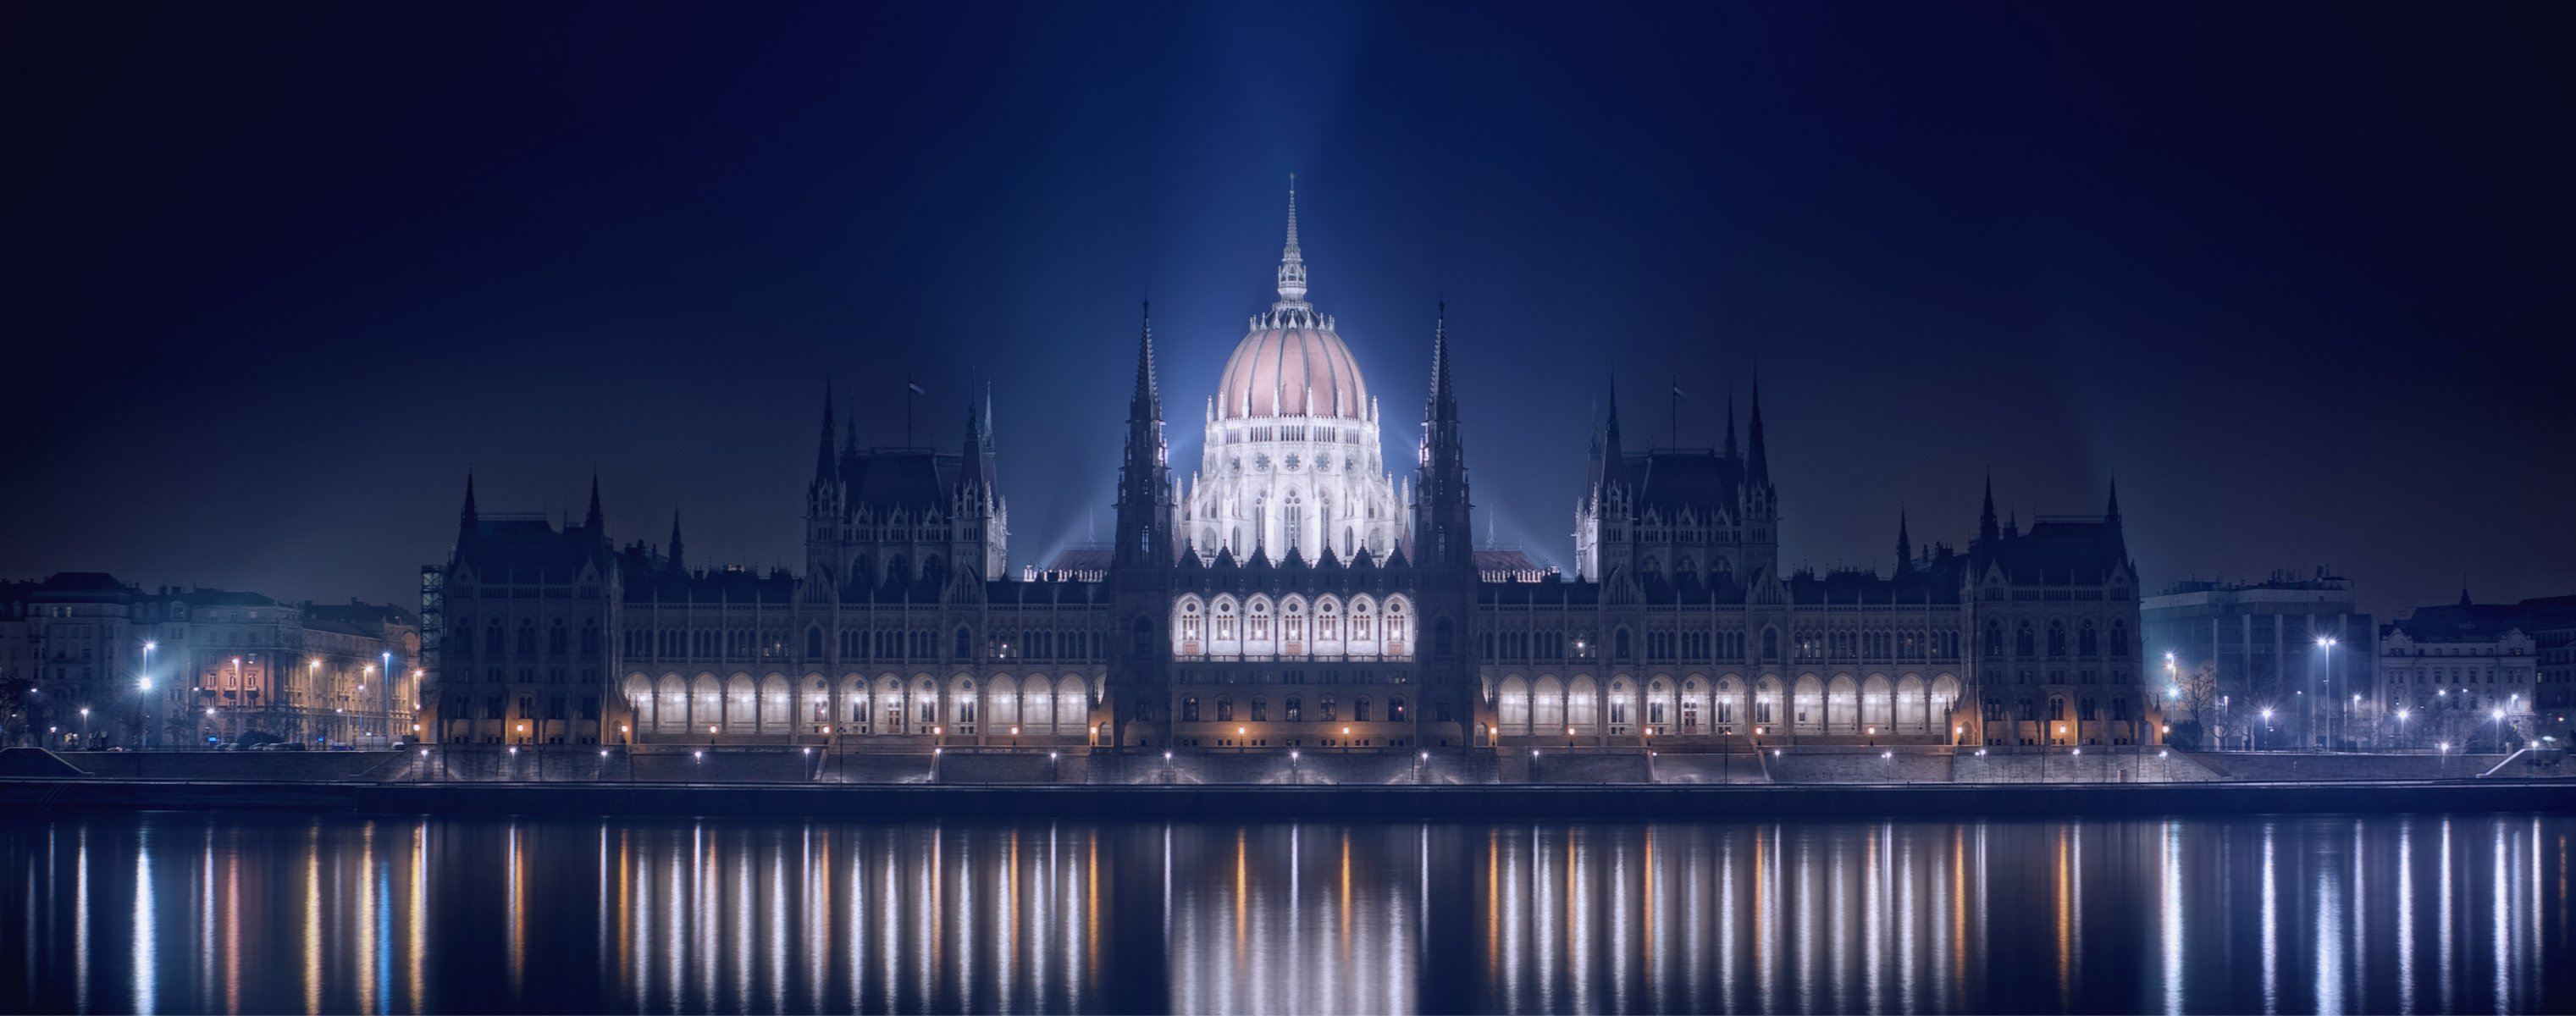 hungary budapest night building the parliament lights light embankment river danube reflection